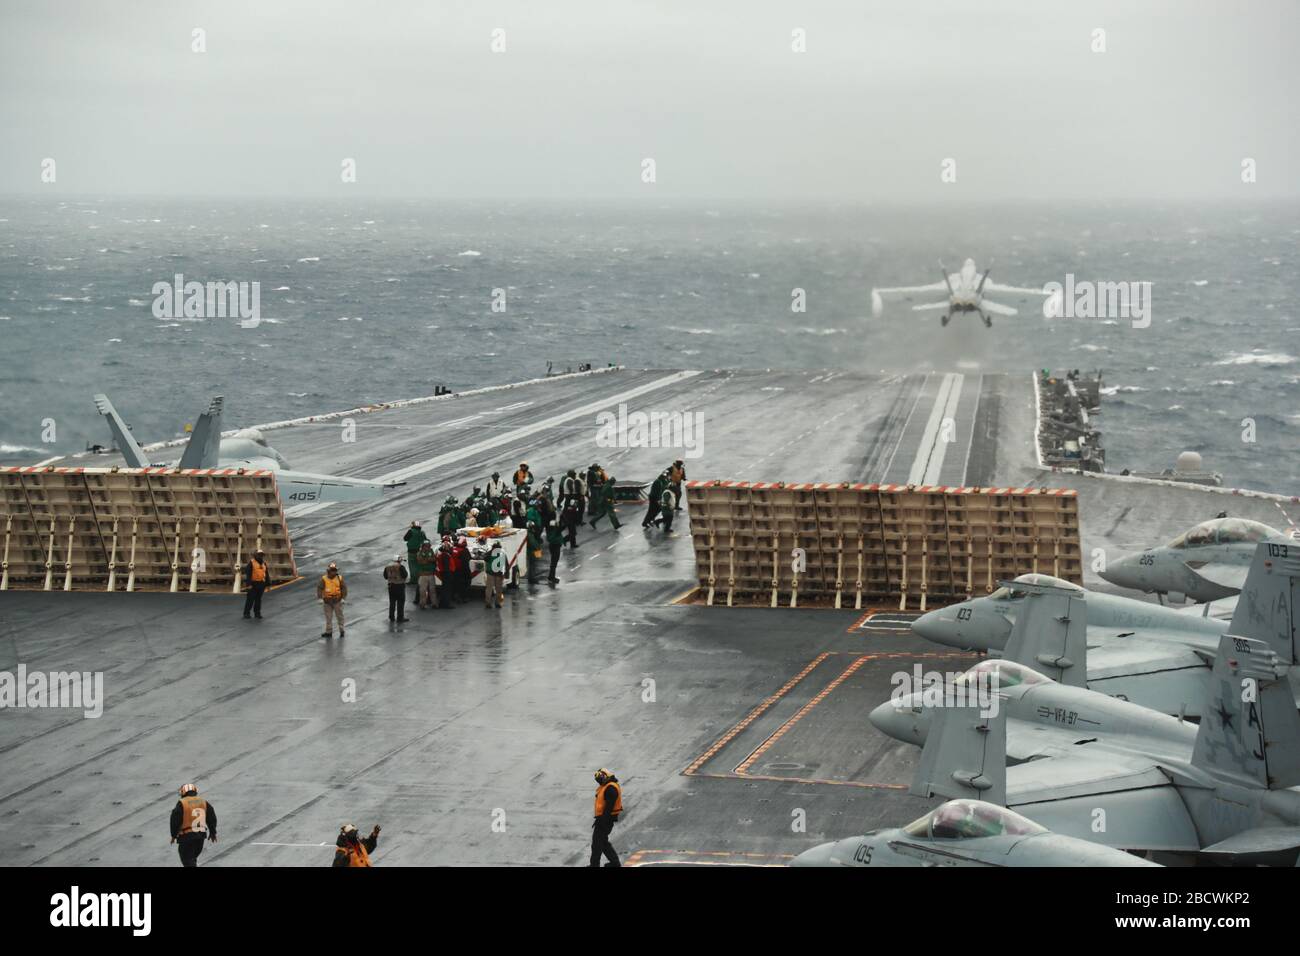 U.S. Navy F/A-18E and F/A-18F Super Hornet fighter aircraft stack up as they prepare for rapid launch on the flight deck of the Ford-class aircraft carrier USS Gerald R. Ford underway conducting its flight deck and combat air traffic control center certification March 21, 2020 in the Atlantic Ocean. Stock Photo